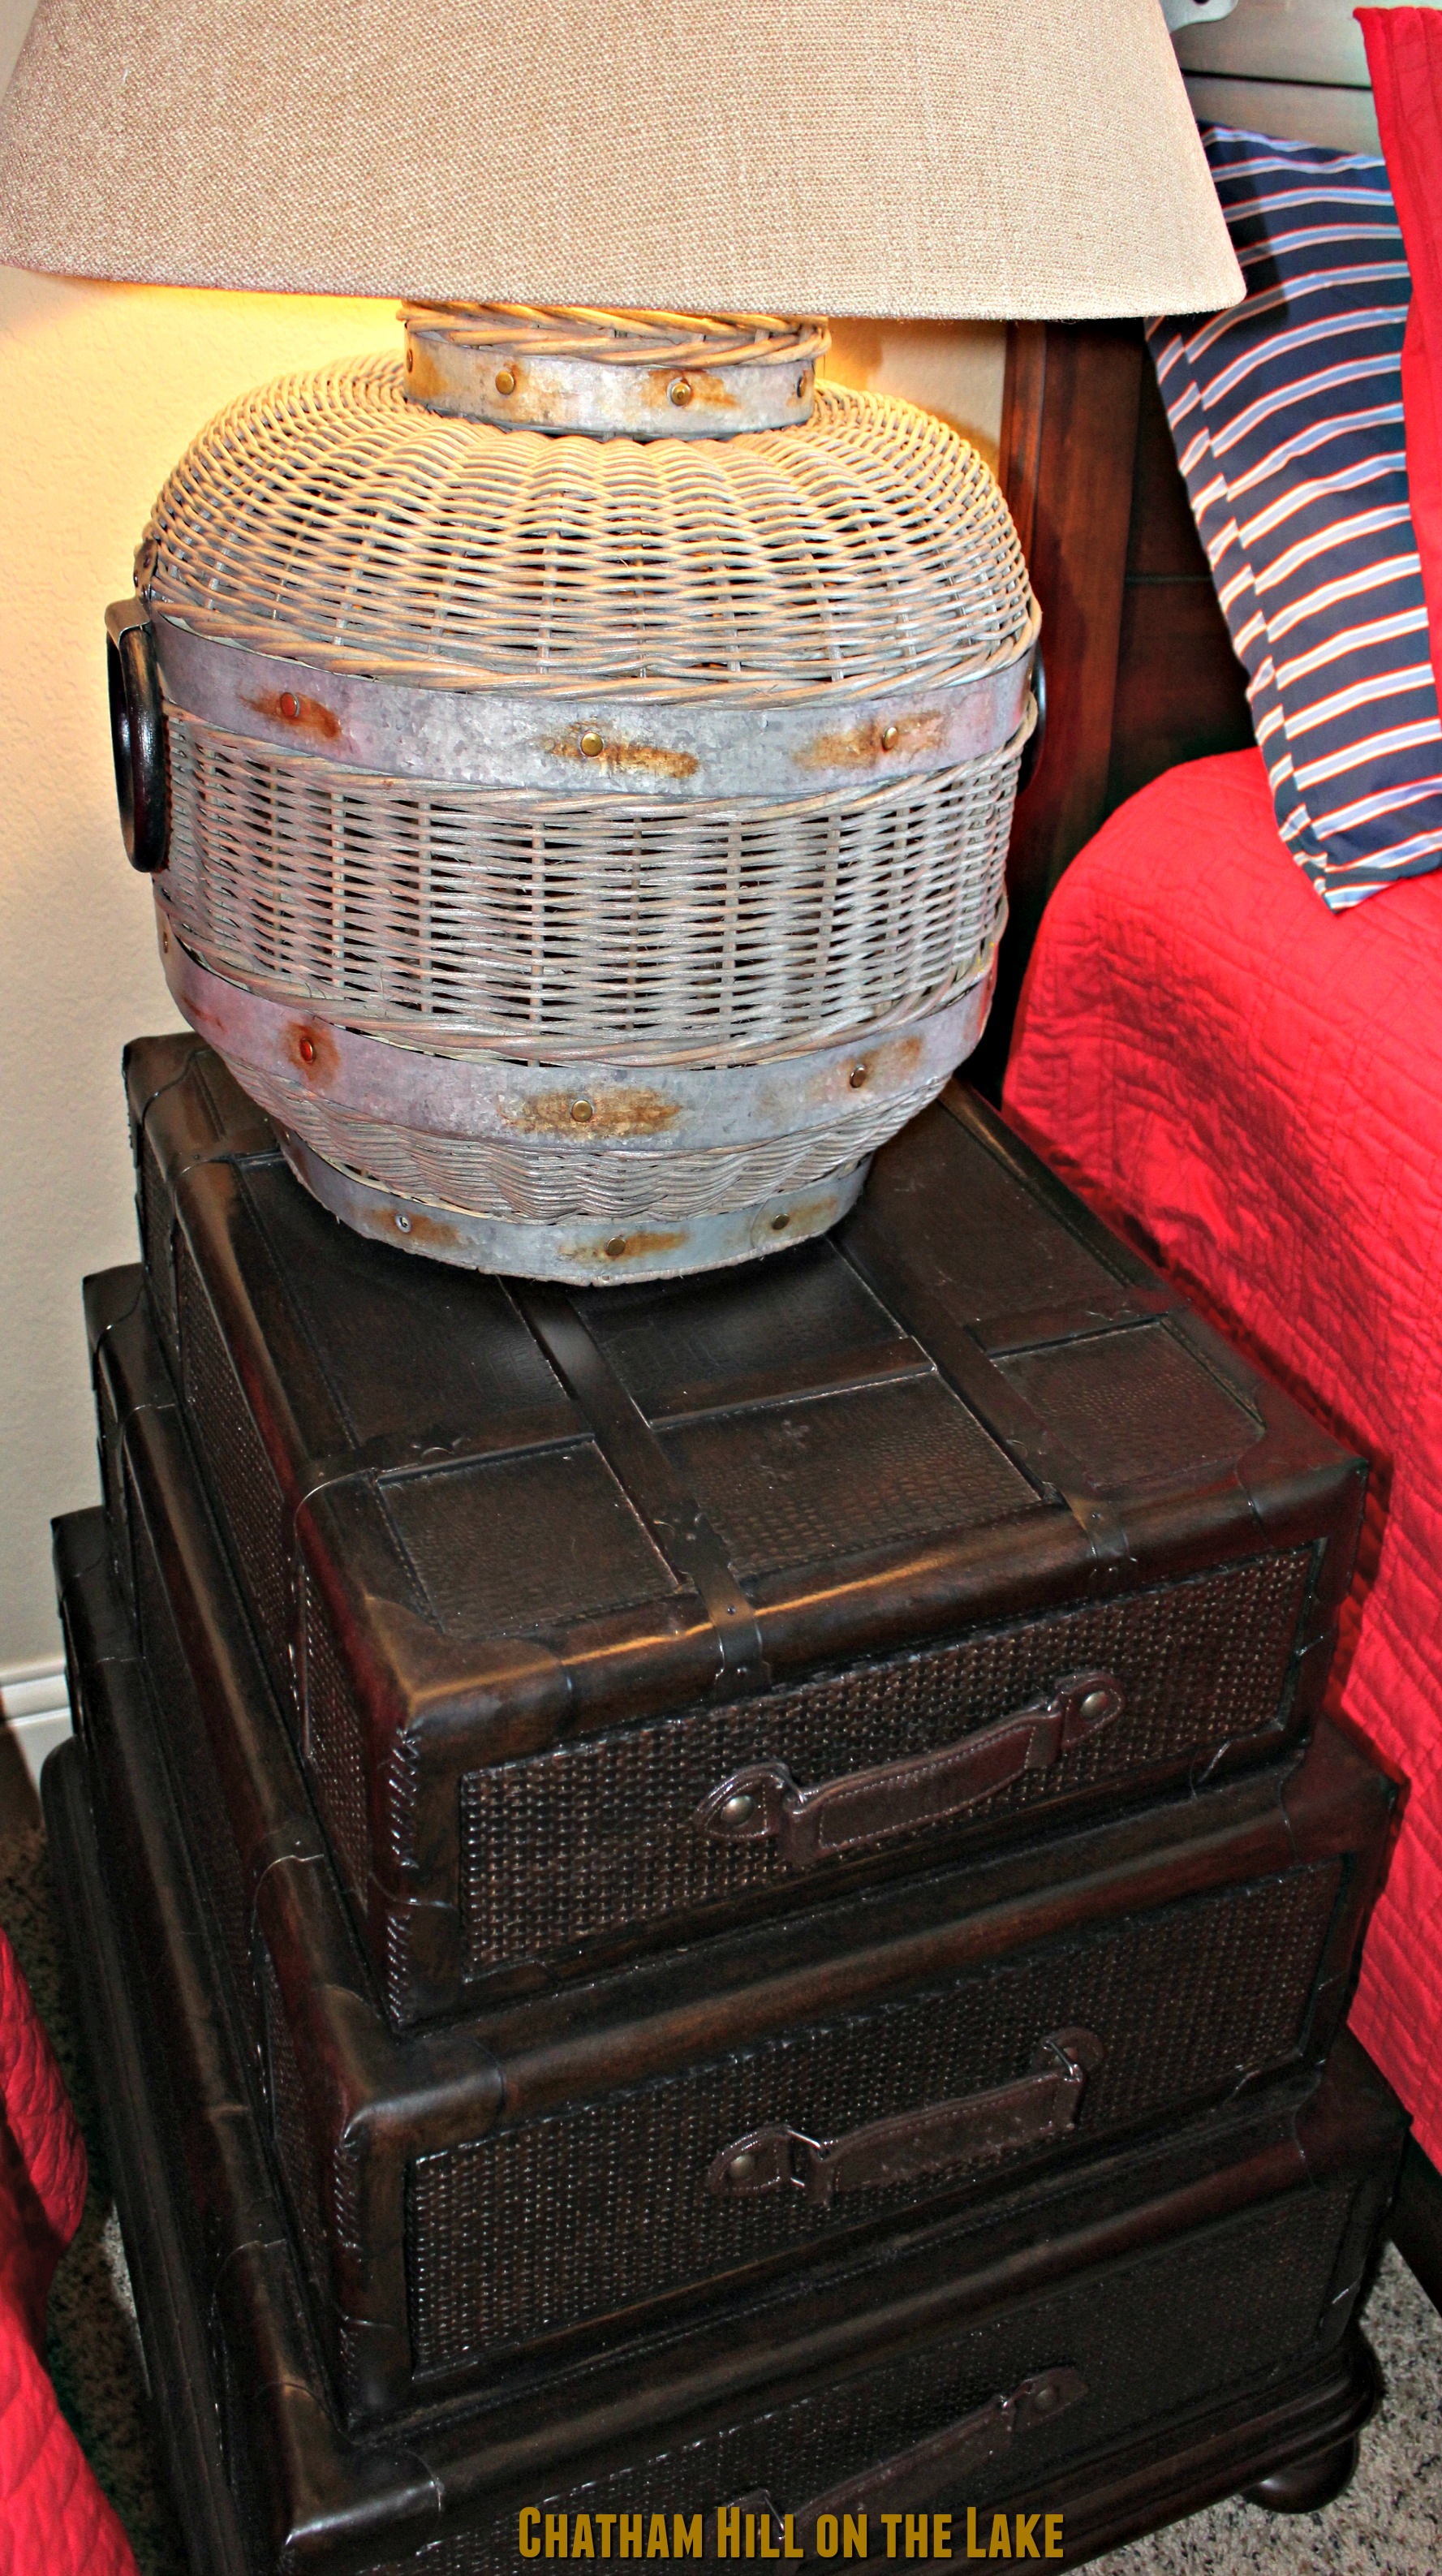 Luggage Furniture for guest room at www.chathamhillonthelake.com